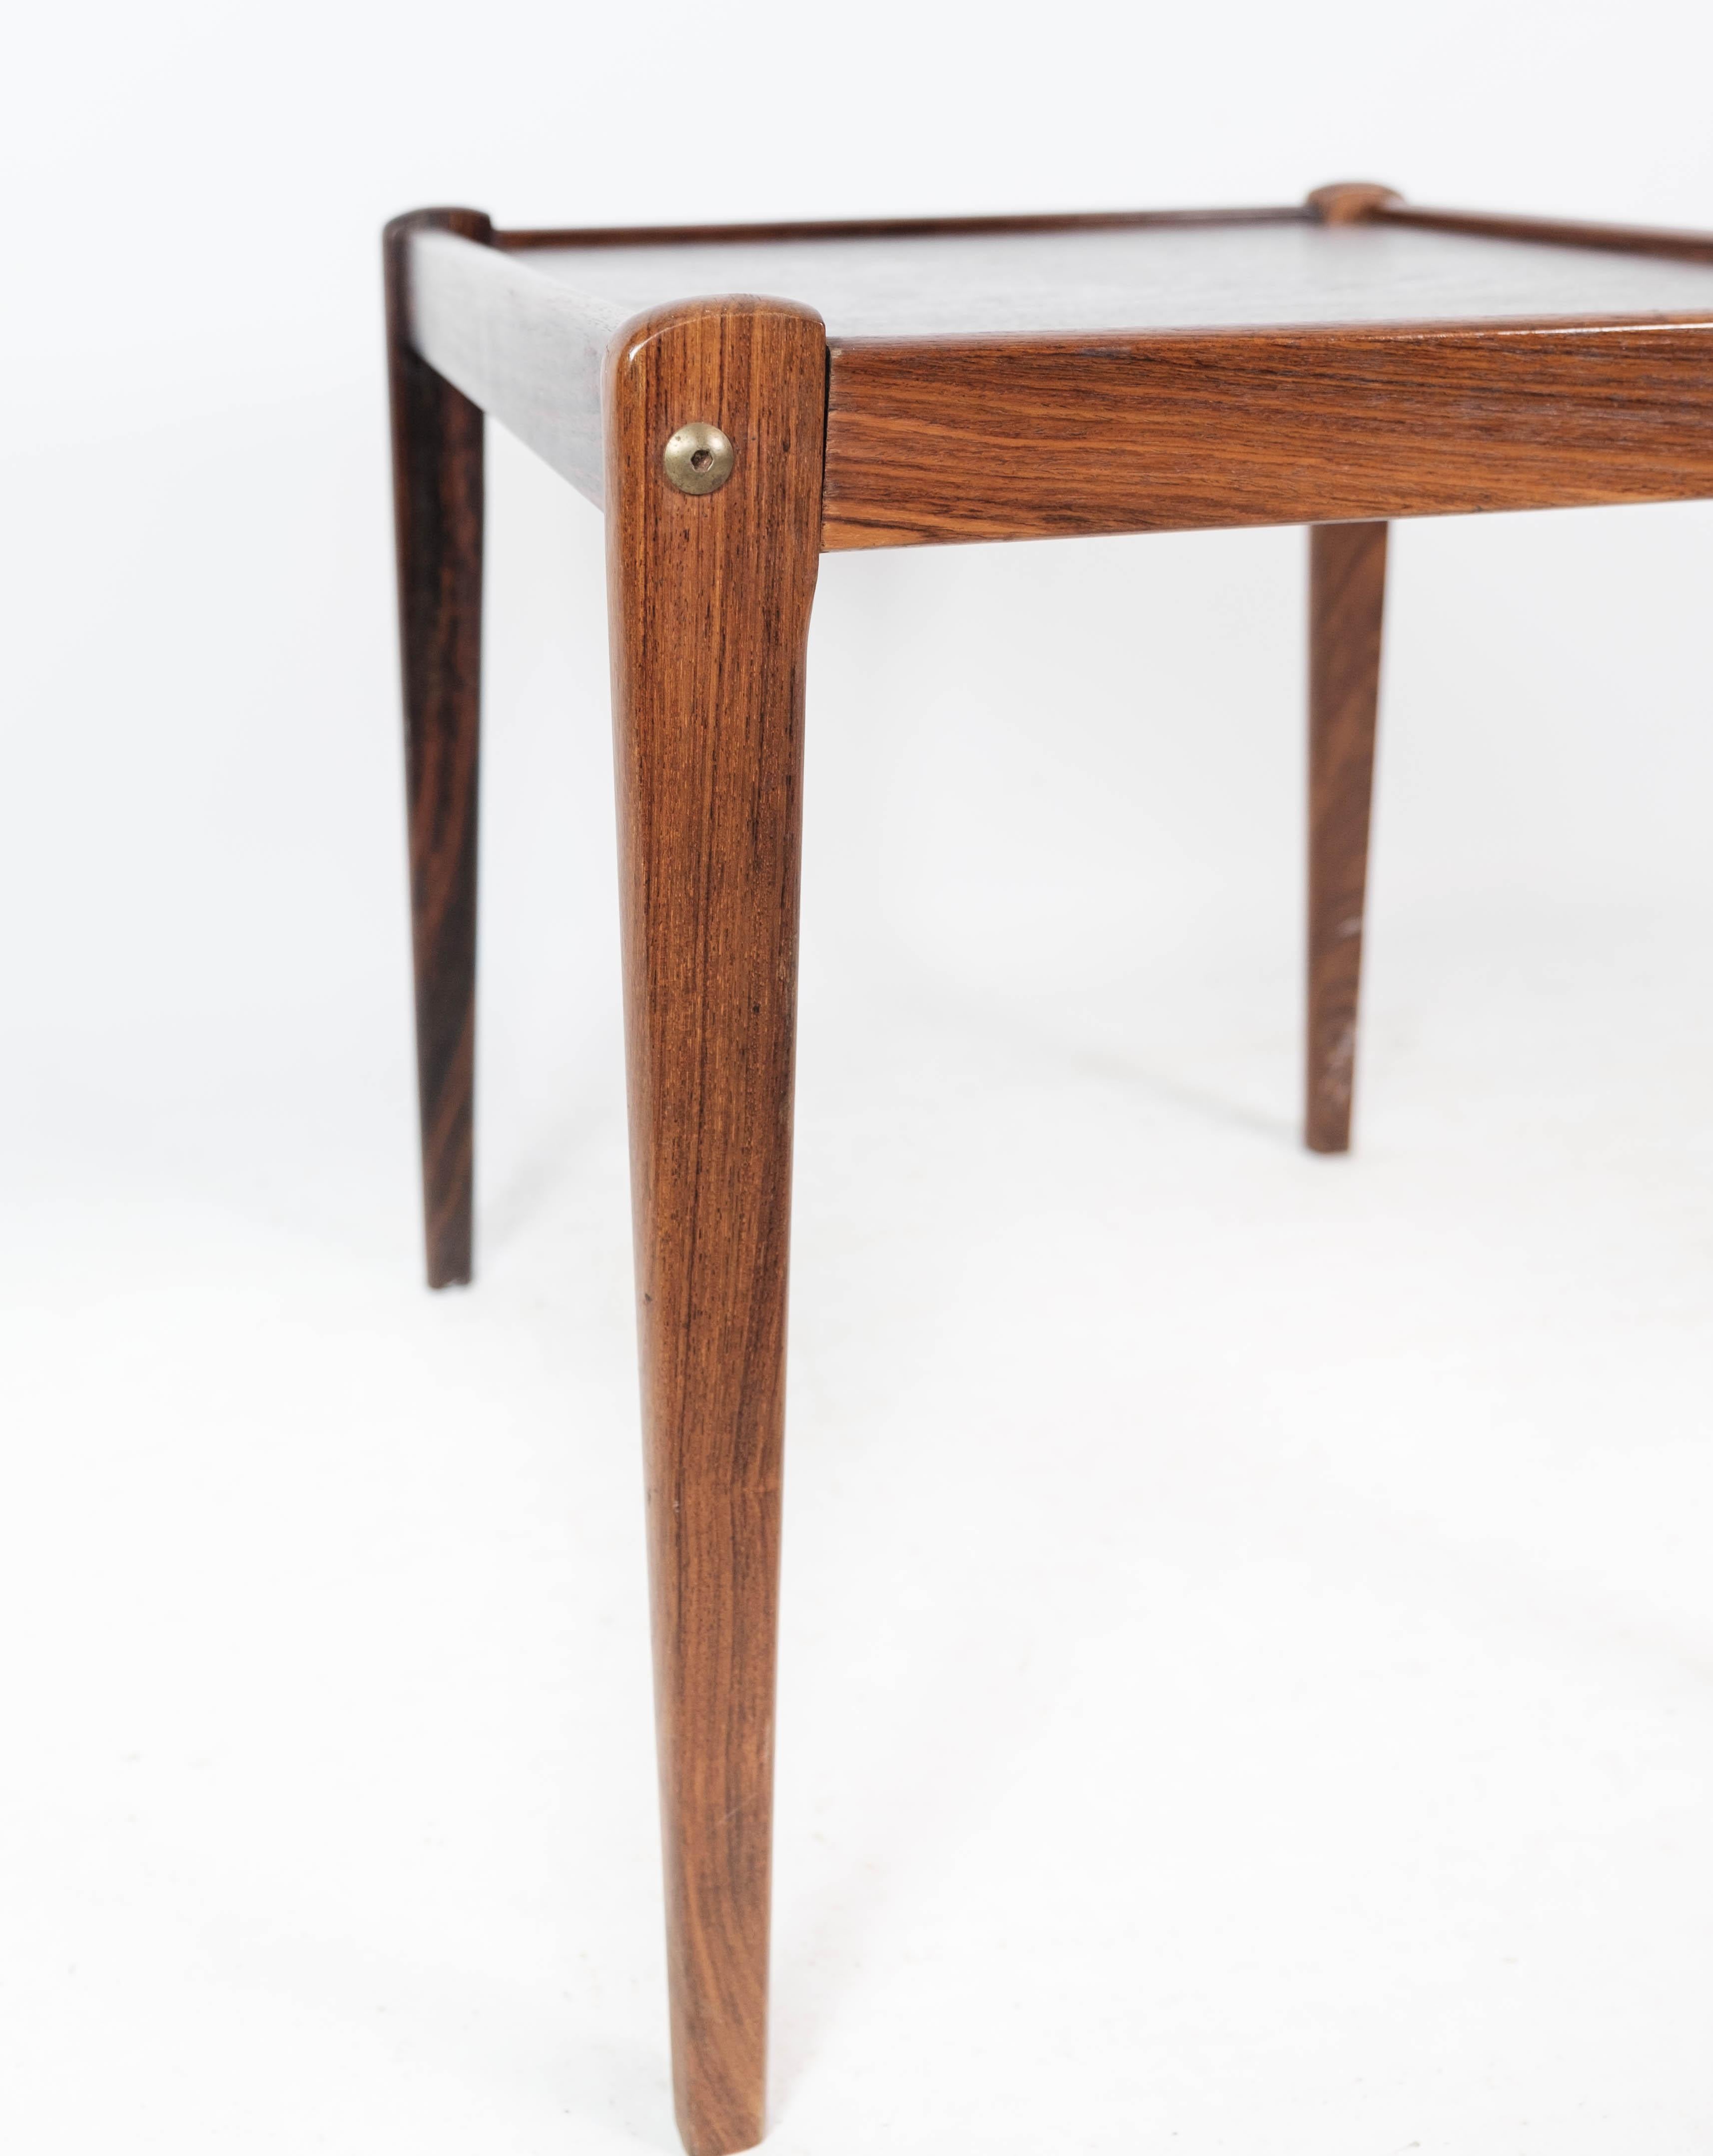 Scandinavian Modern Side Table in Rosewood of Danish Design from the 1960s For Sale